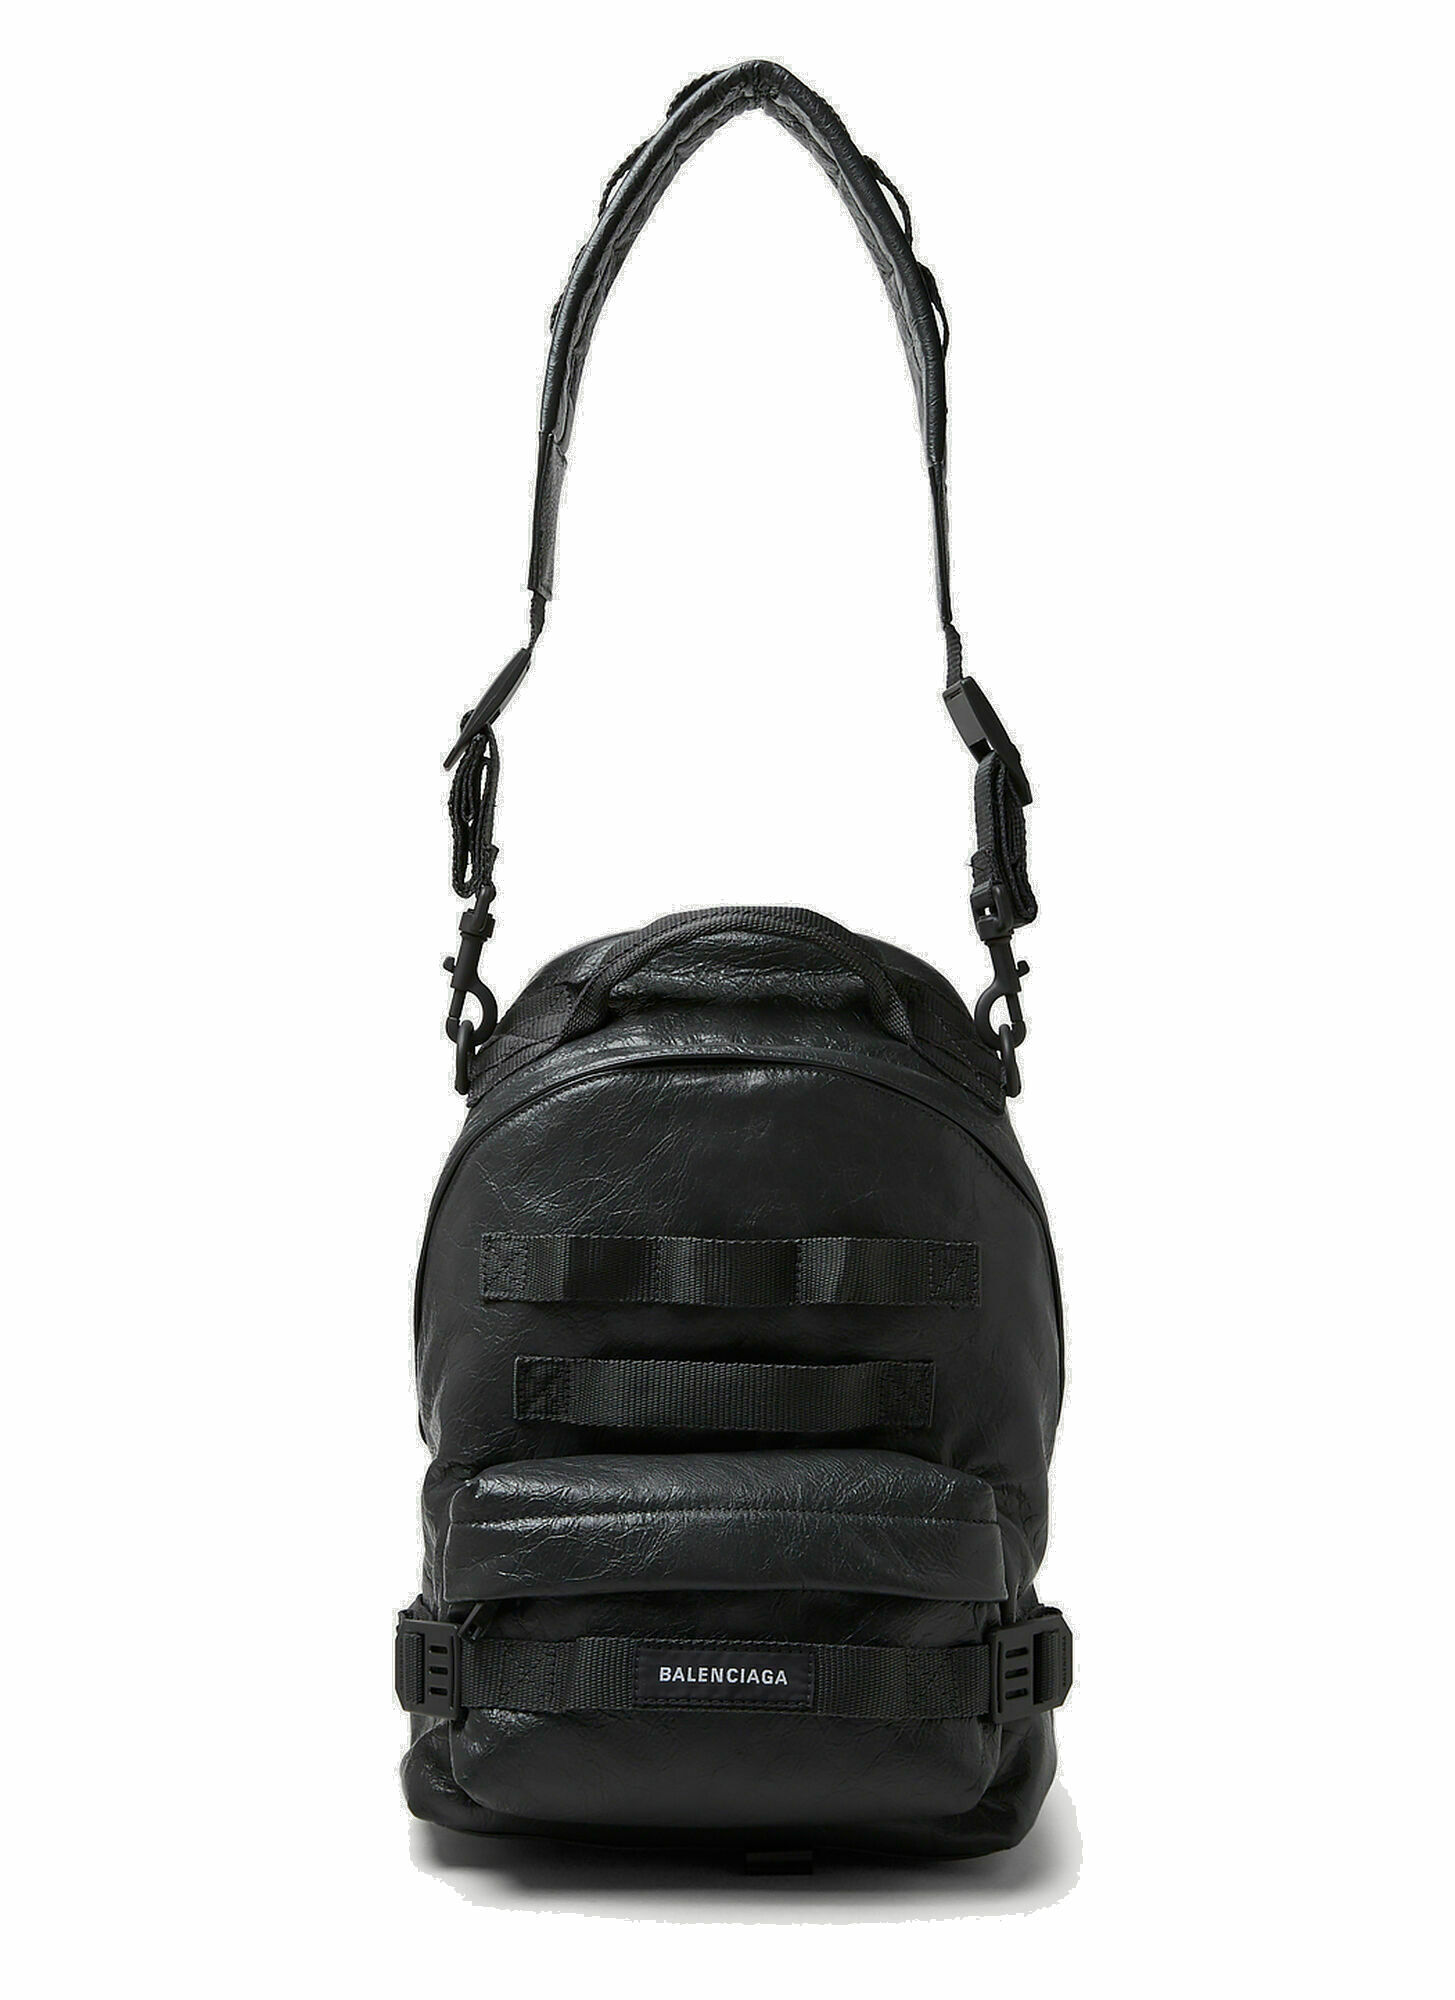 Photo: Army Backpack in Black